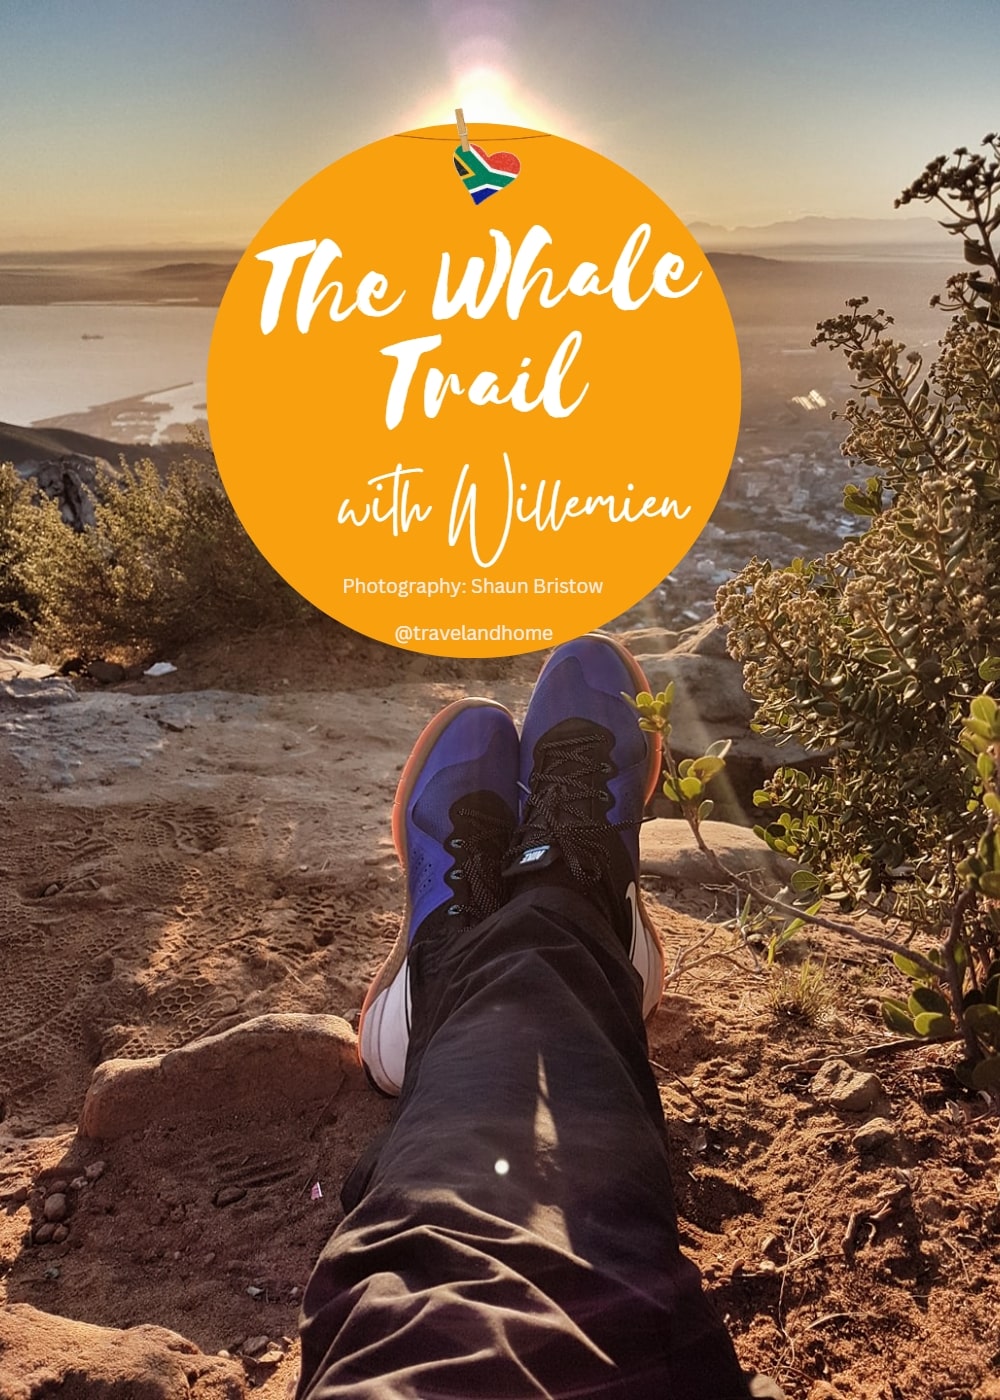 Hike de hoop nature reserve the whale trail accommodation travelandhome cape town hiking min